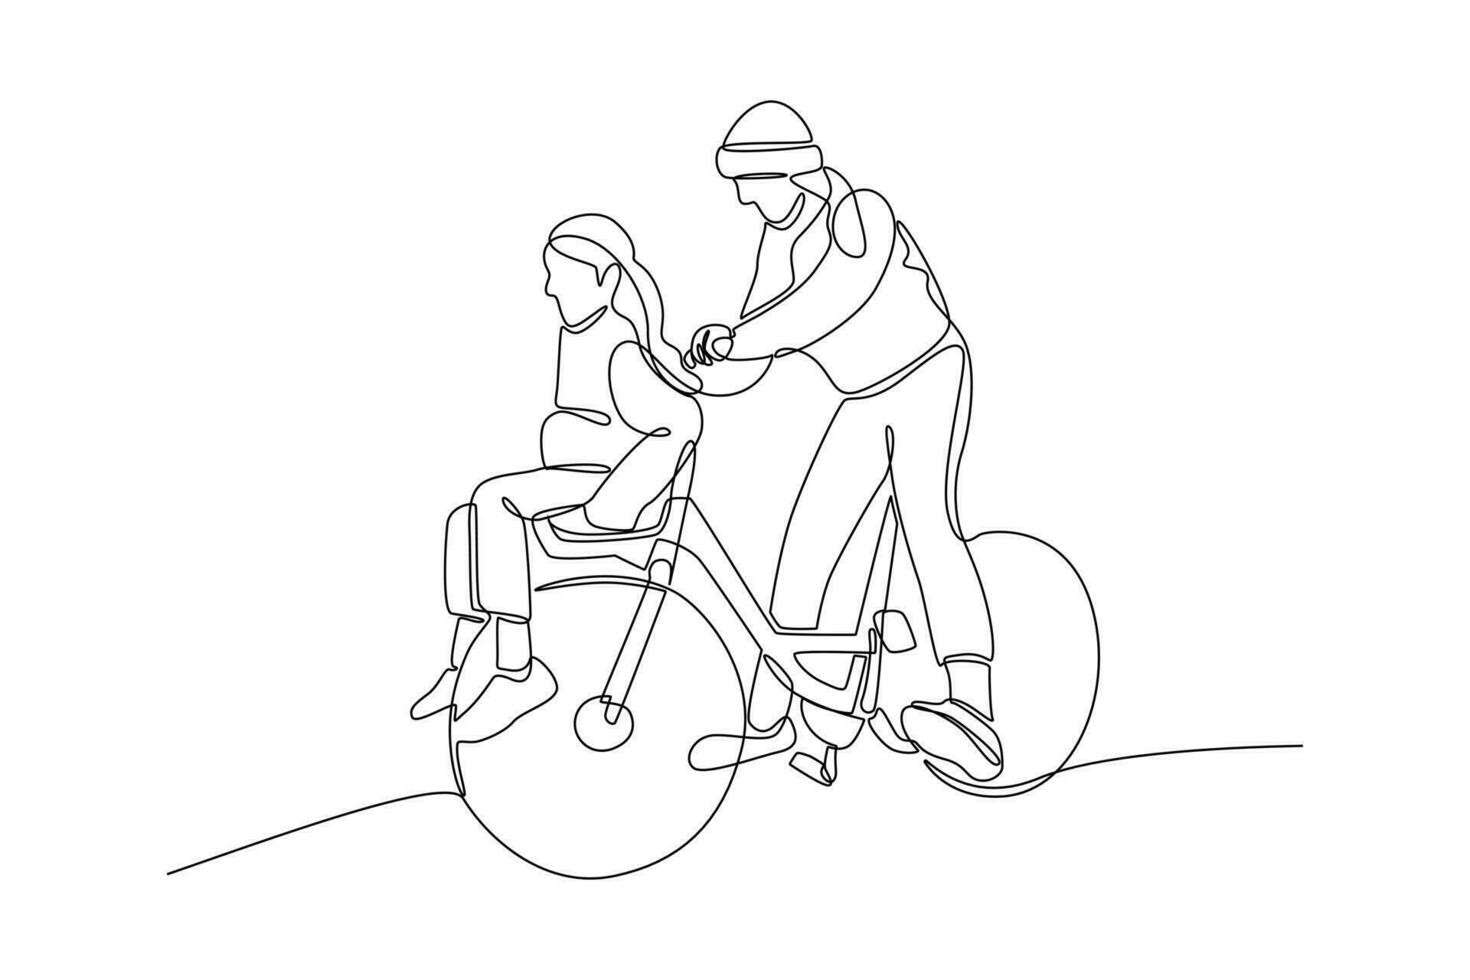 Continuous one line drawing Happy Parents with her child riding bike together. Vector illustration.